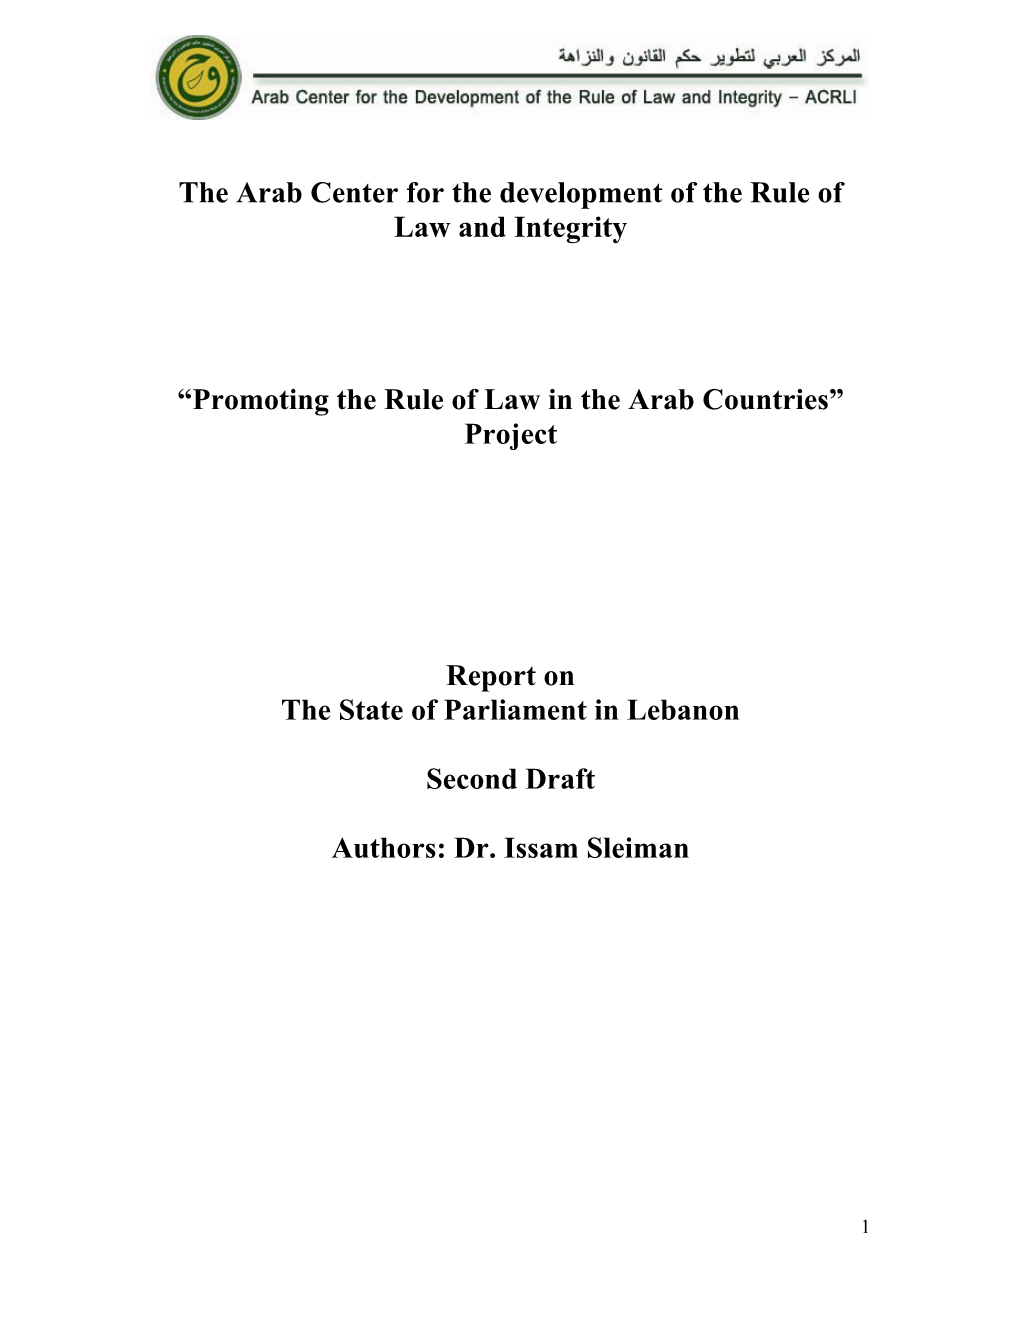 Promoting the Rule of Law in the Arab Countries” Project